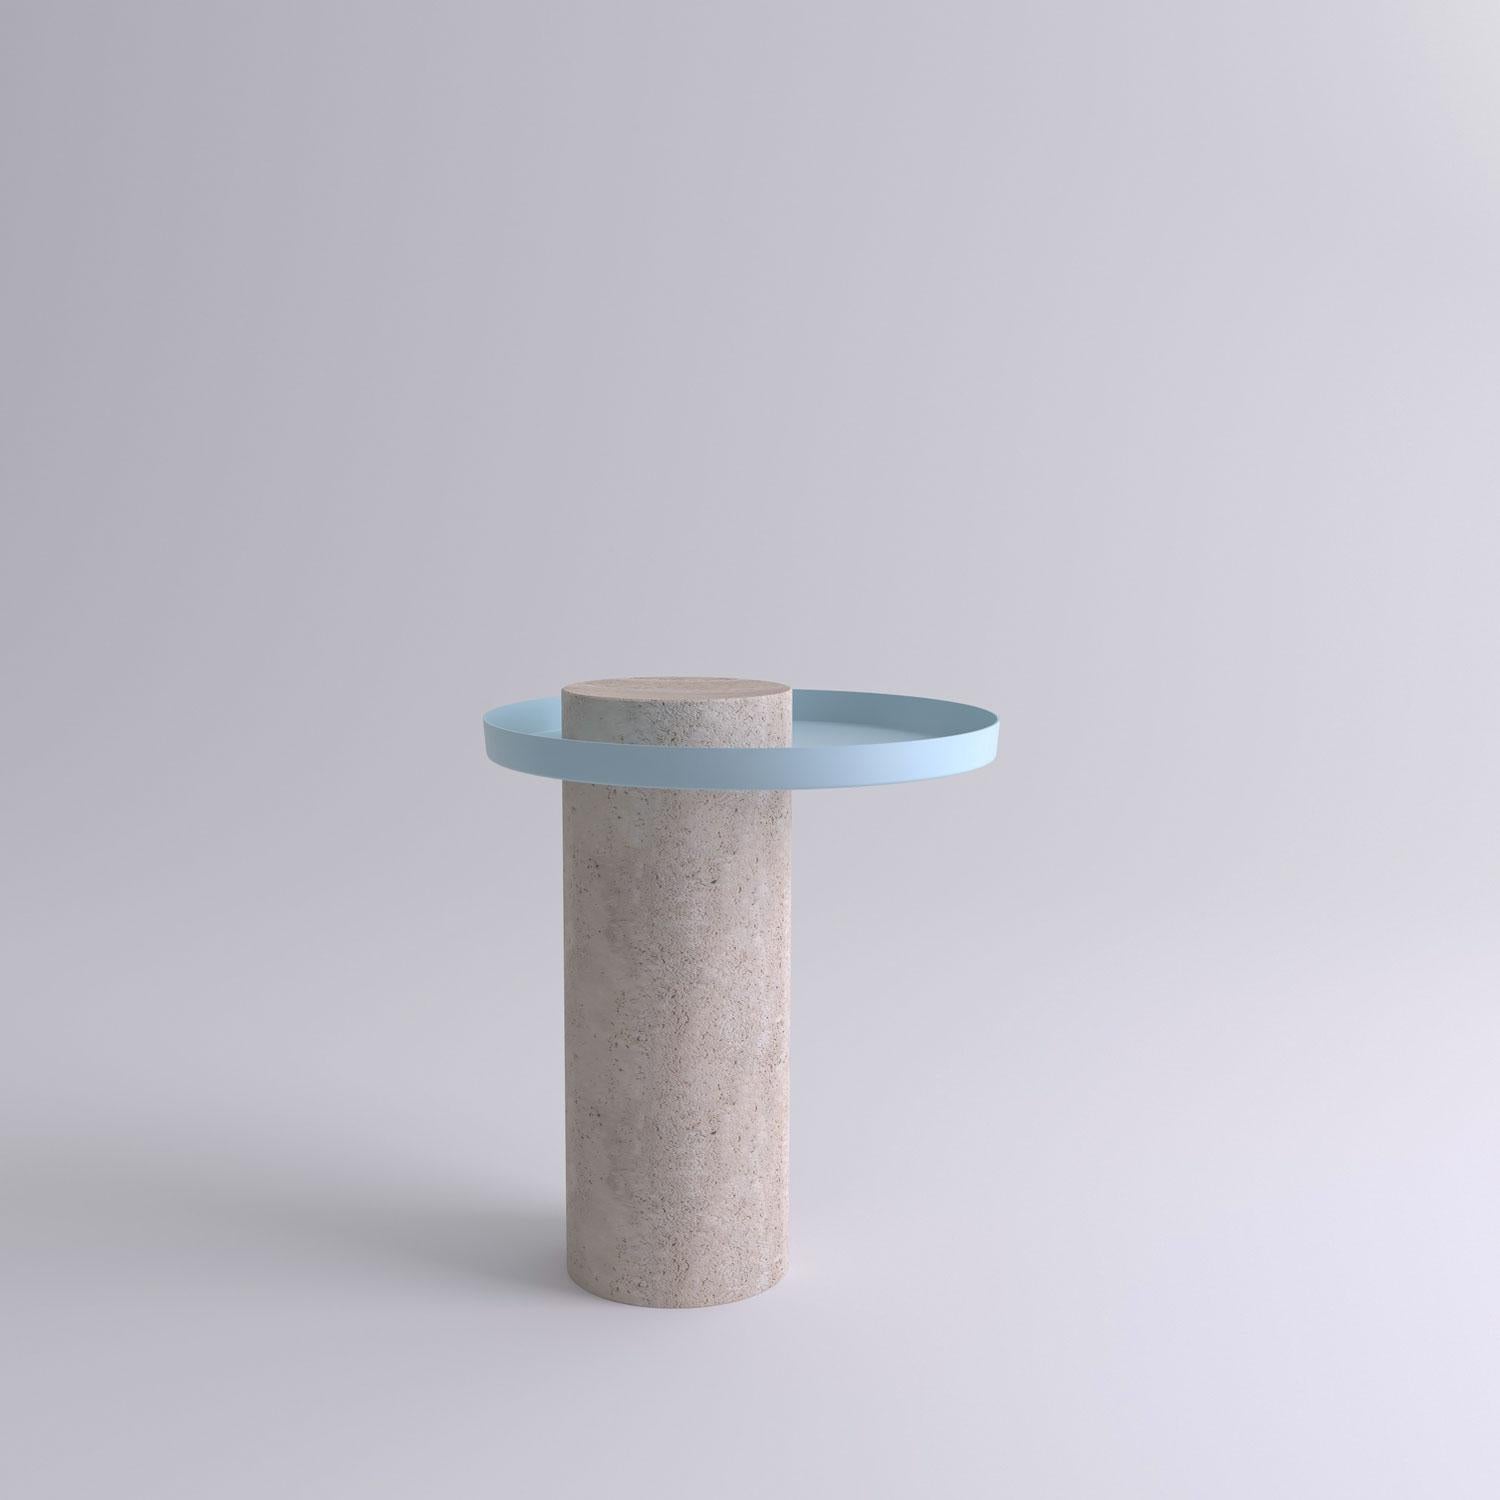 Medium travertine contemporary guéridon, Sebastian Herkner
Dimensions: D 40 x H 46 cm
Materials: Travertine stone, light blue metal tray

The salute table exists in 3 sizes, 4 different marble stones for the column and 5 different finishes for